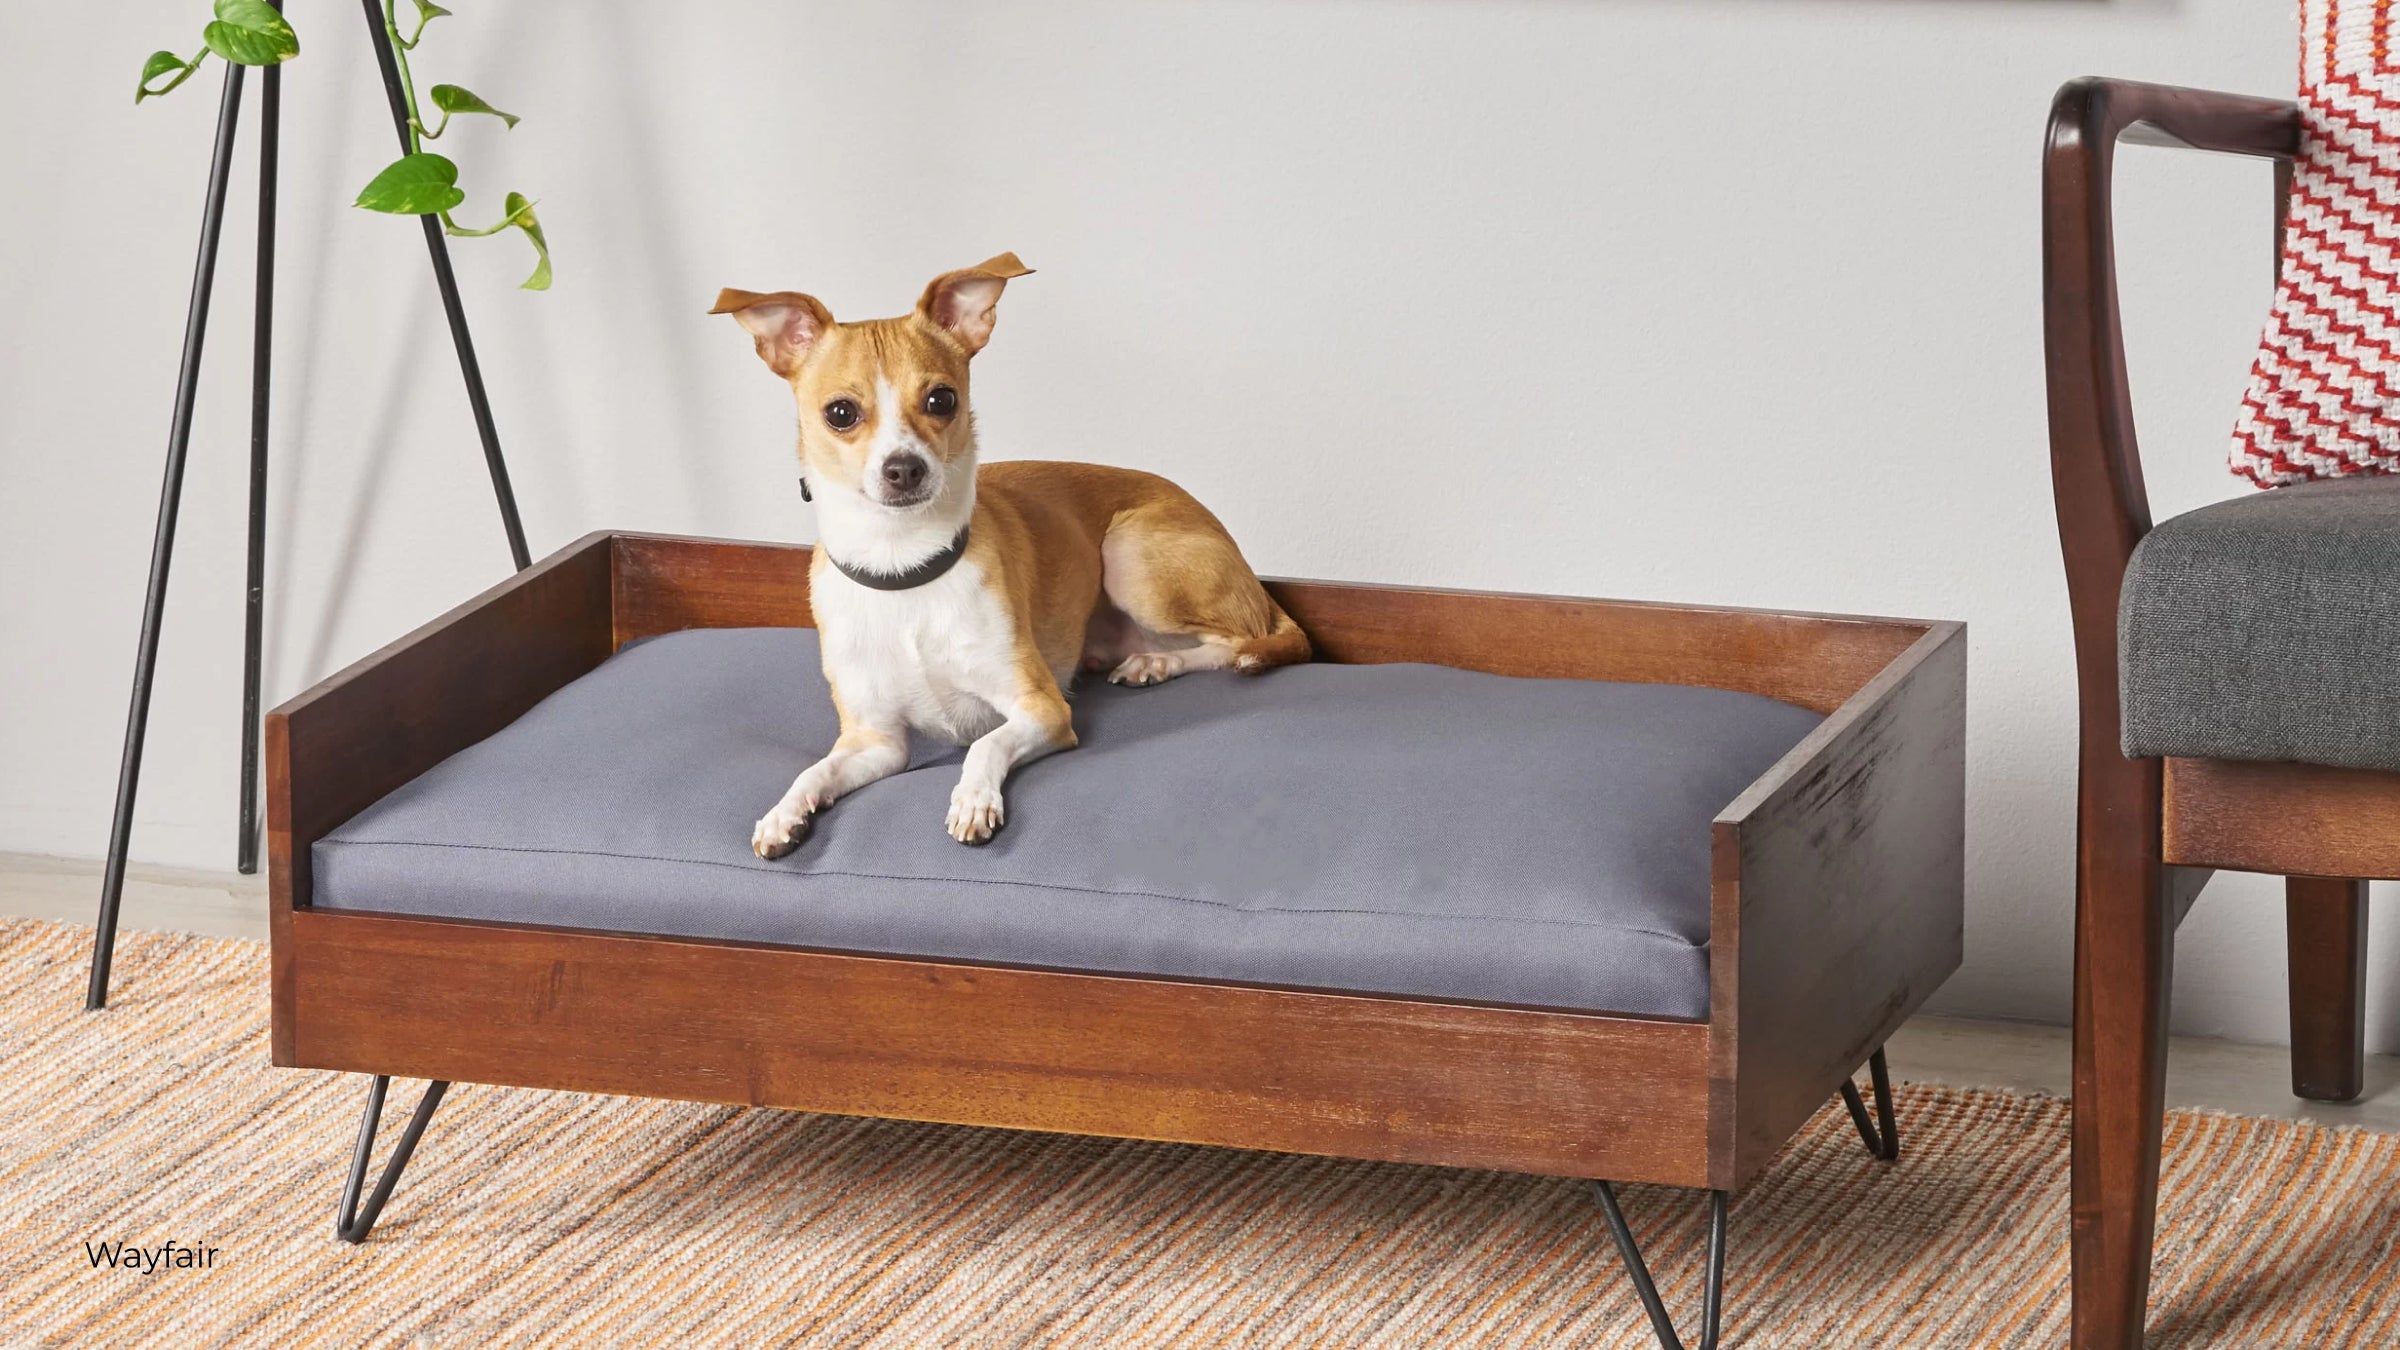 A tan and white dog sits on a mid century dog bed from Wayfair